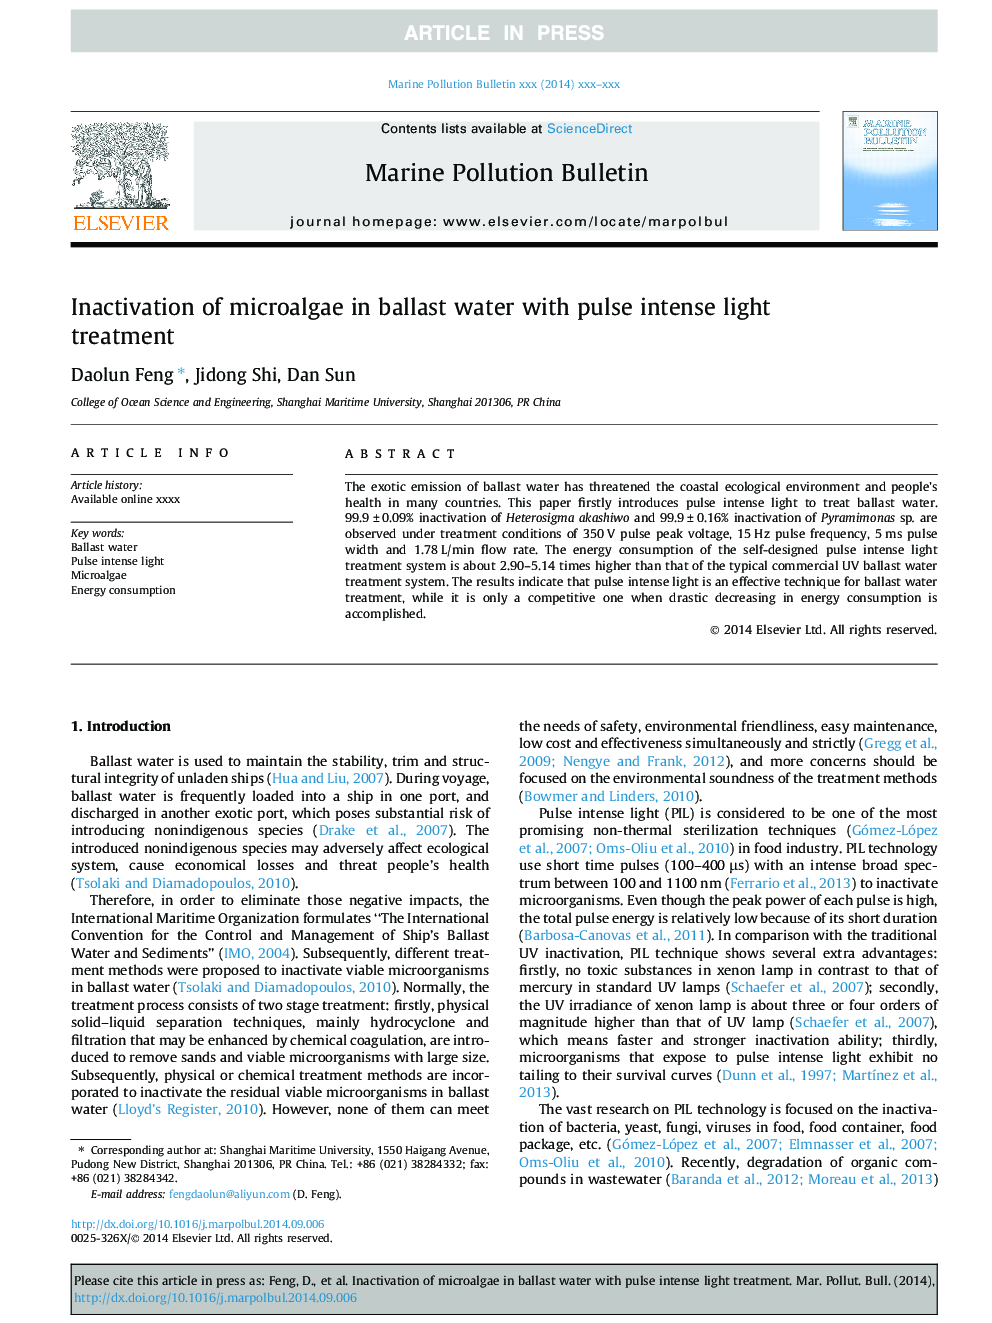 Inactivation of microalgae in ballast water with pulse intense light treatment